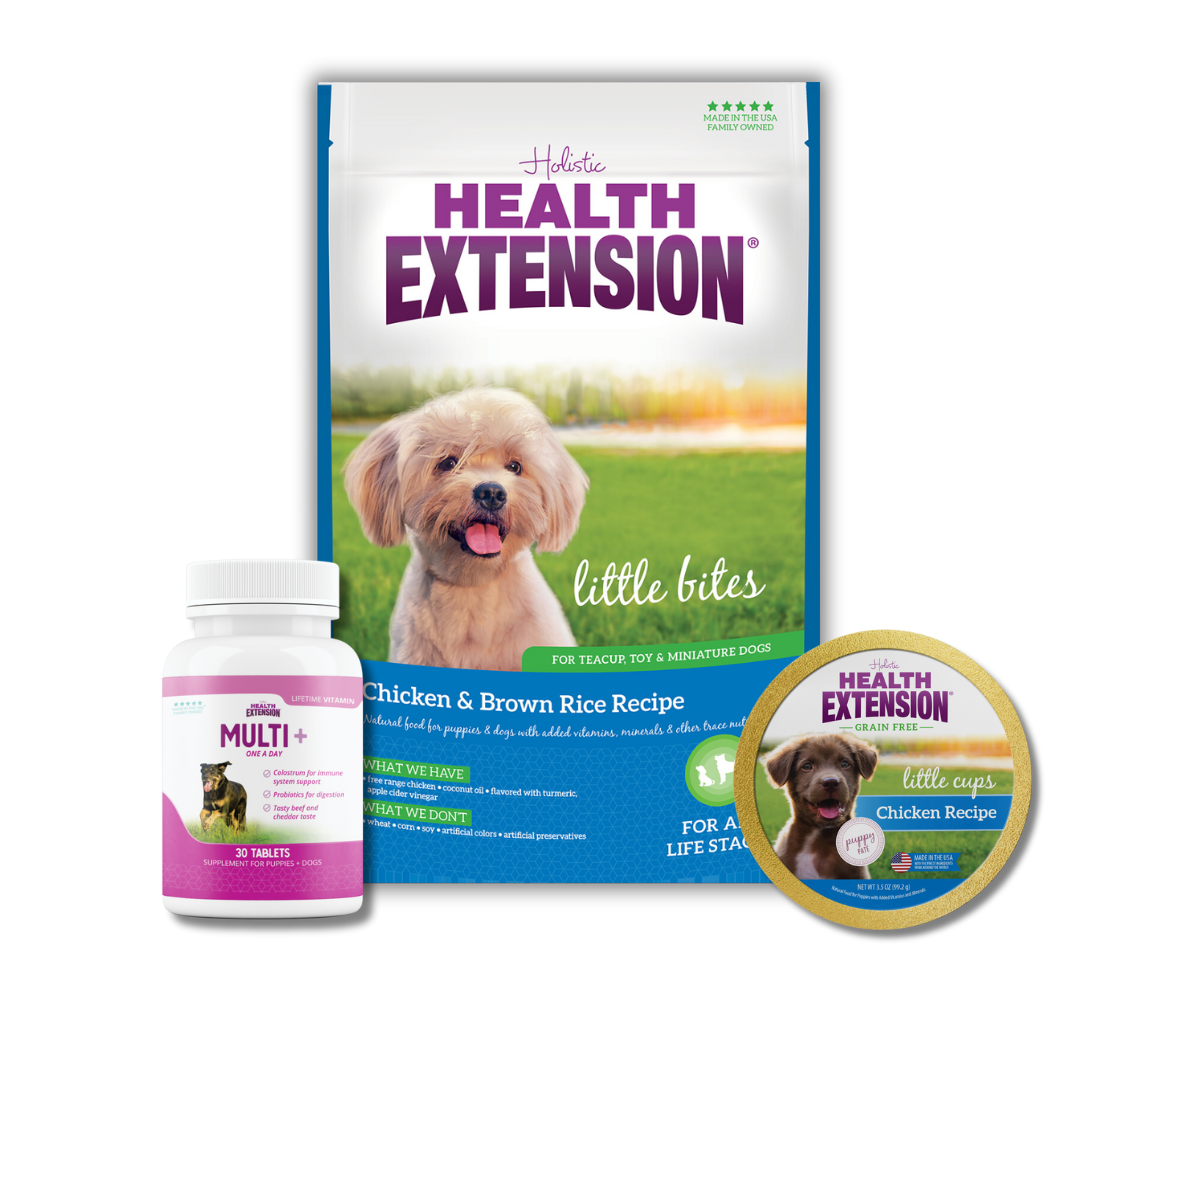 Puppy Trial Bundle for Small Breed: Bag of Health Extension Little Bites Chicken & Brown Rice Recipe,  a bottle of Health Extension Multi+ vitamins for puppies and dogs, Grain Free Little Cups for Small Breeds